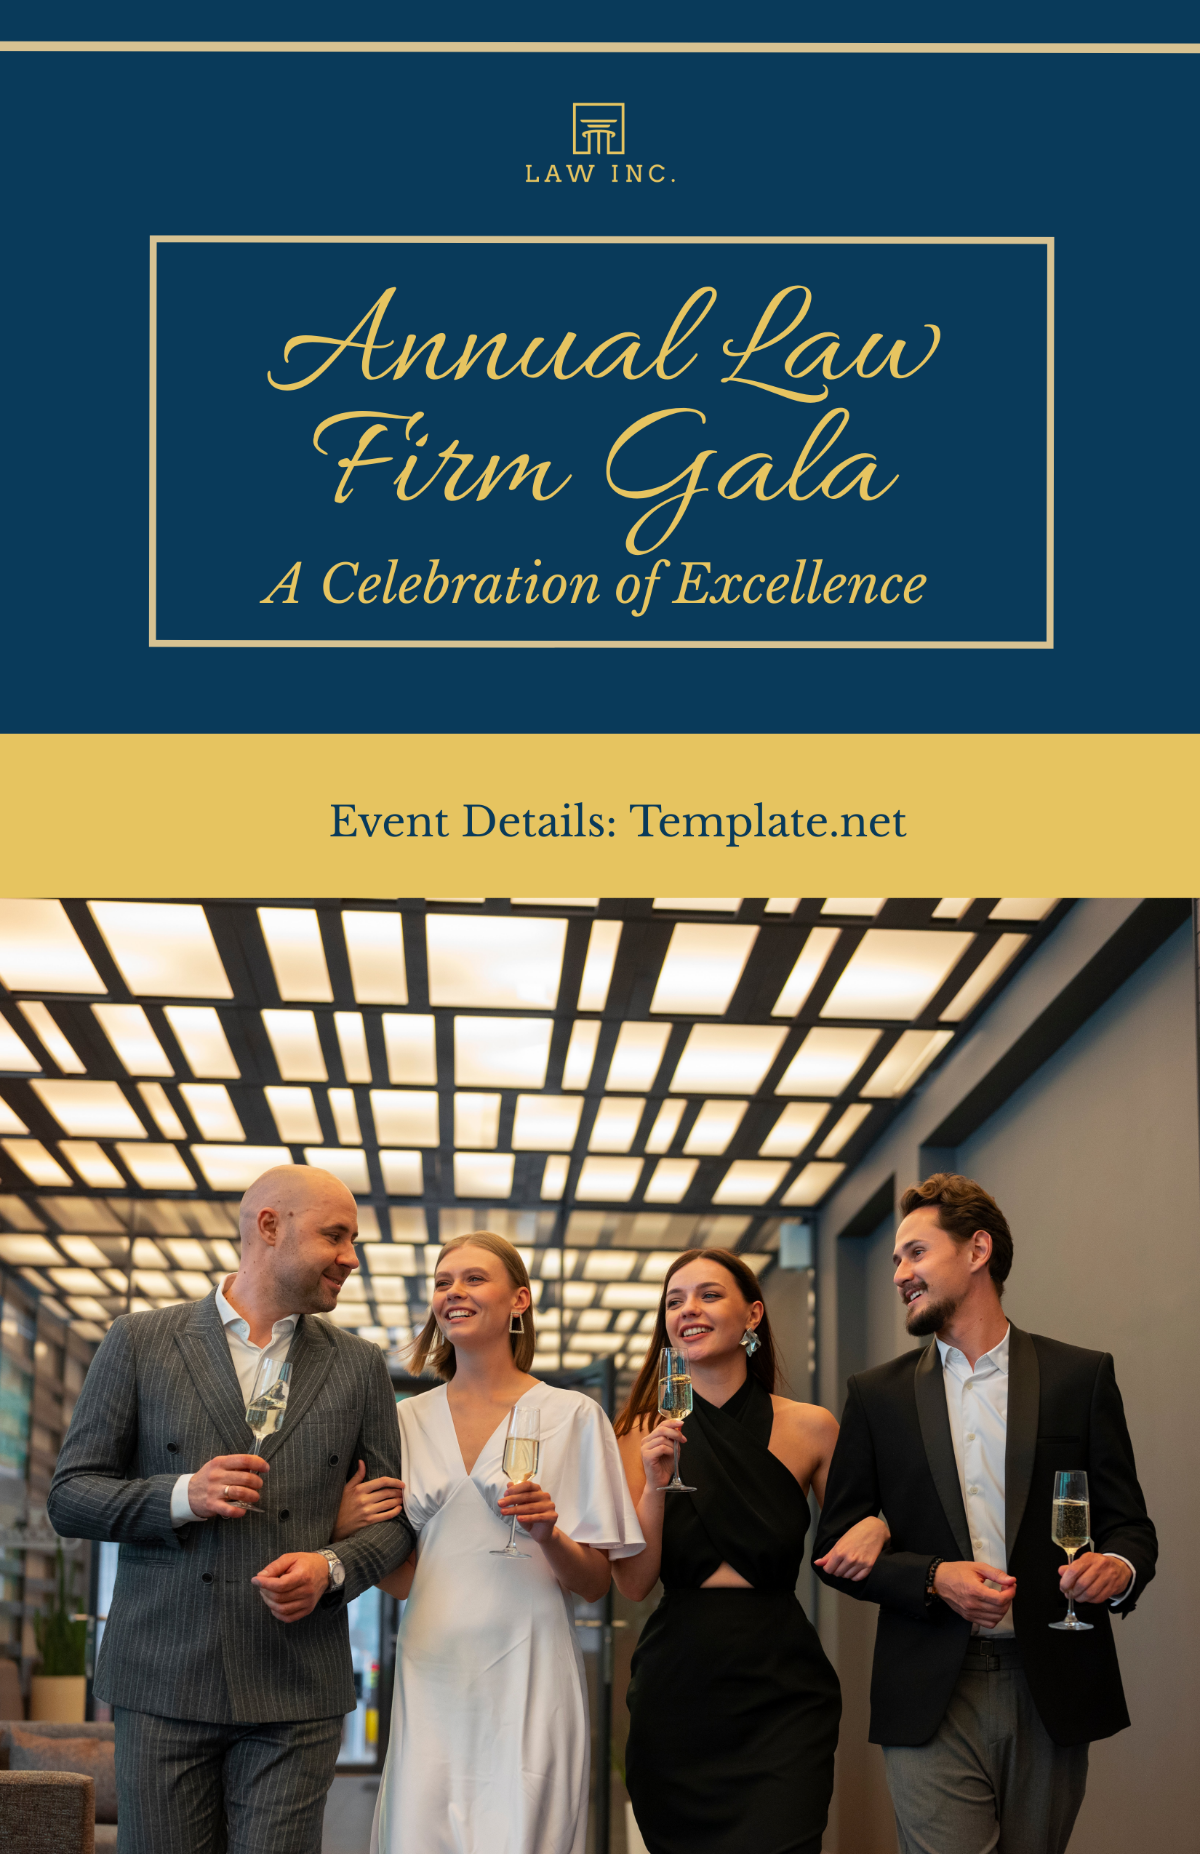 Law Firm Event Poster Template